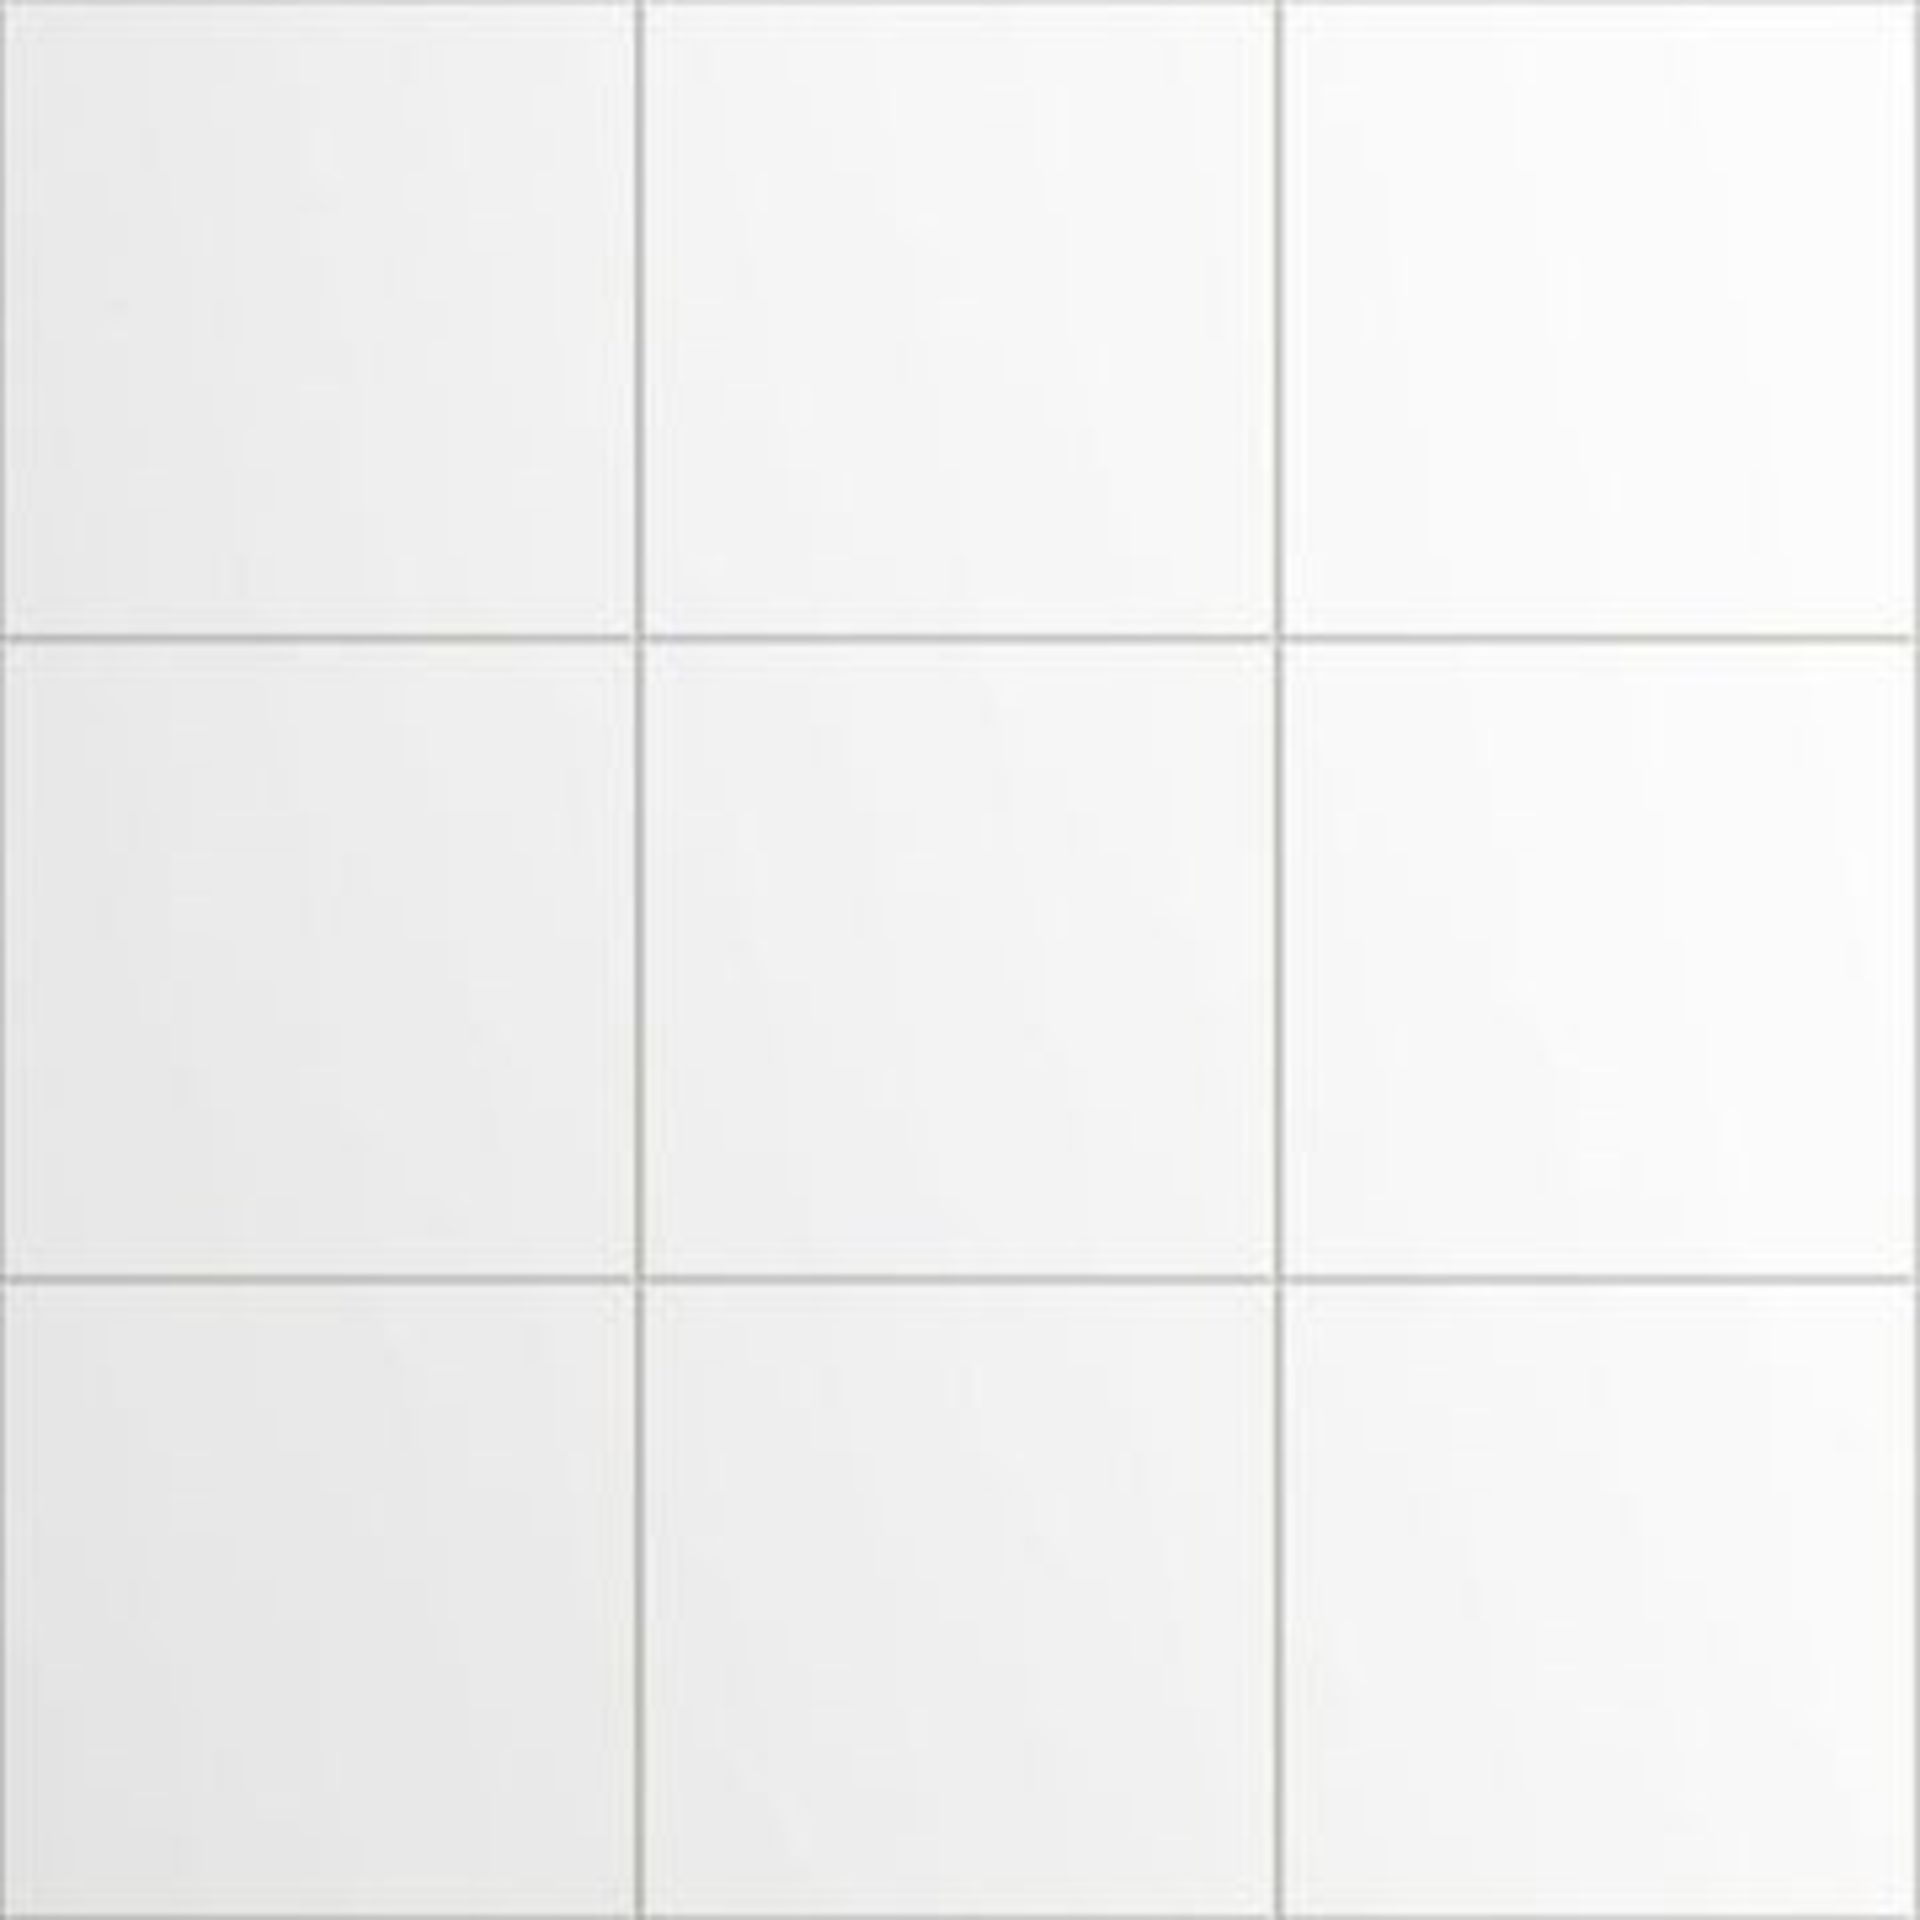 NEW 6 Square Meters of 150x150mm White Square Porcelain Wall Tiles. White tiles are an essenti... - Image 3 of 3